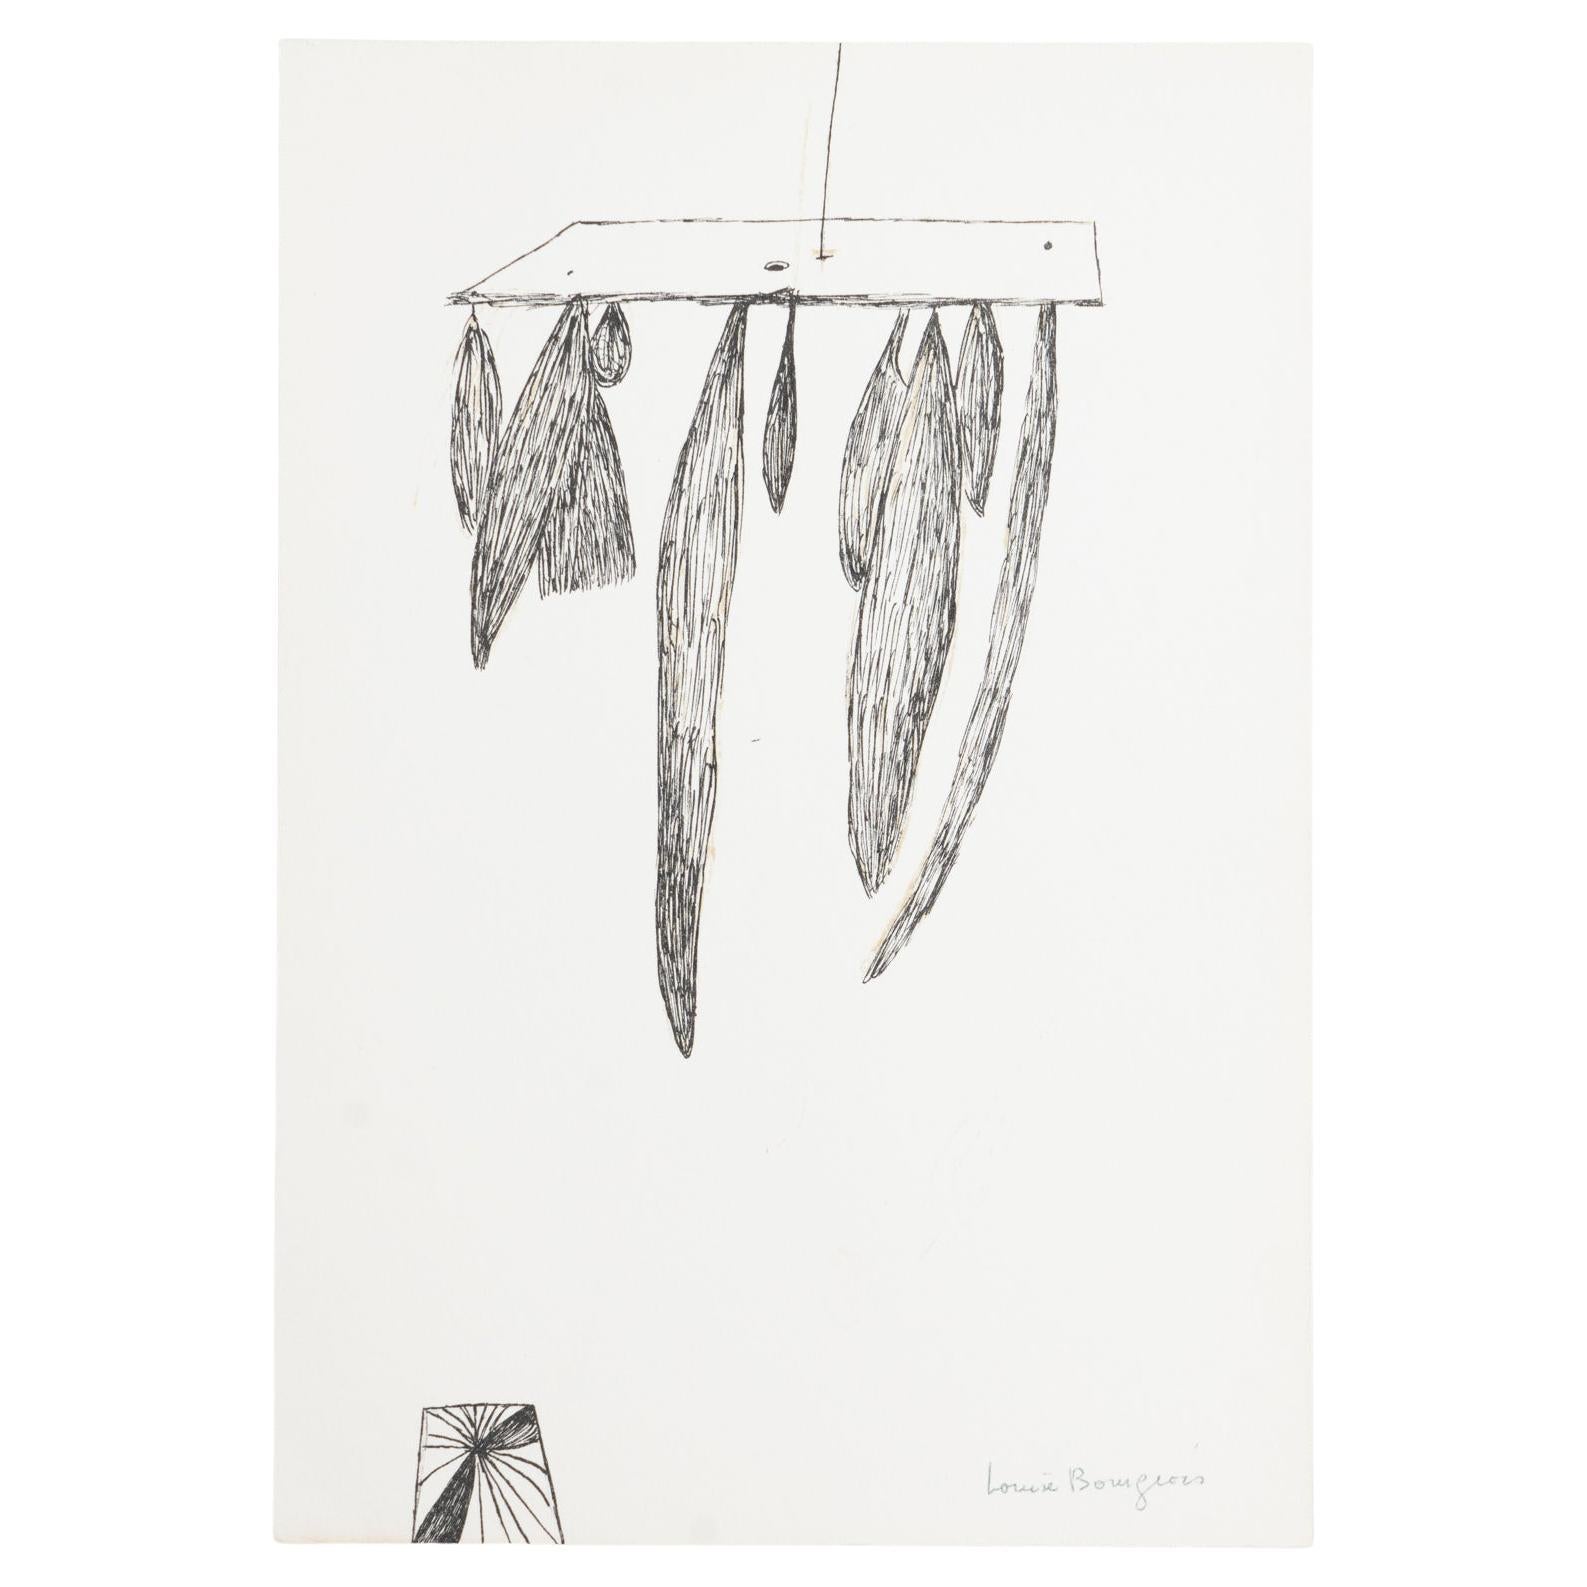 Louise Bourgeois 'Sheaves' Lithography, 1985 For Sale 2